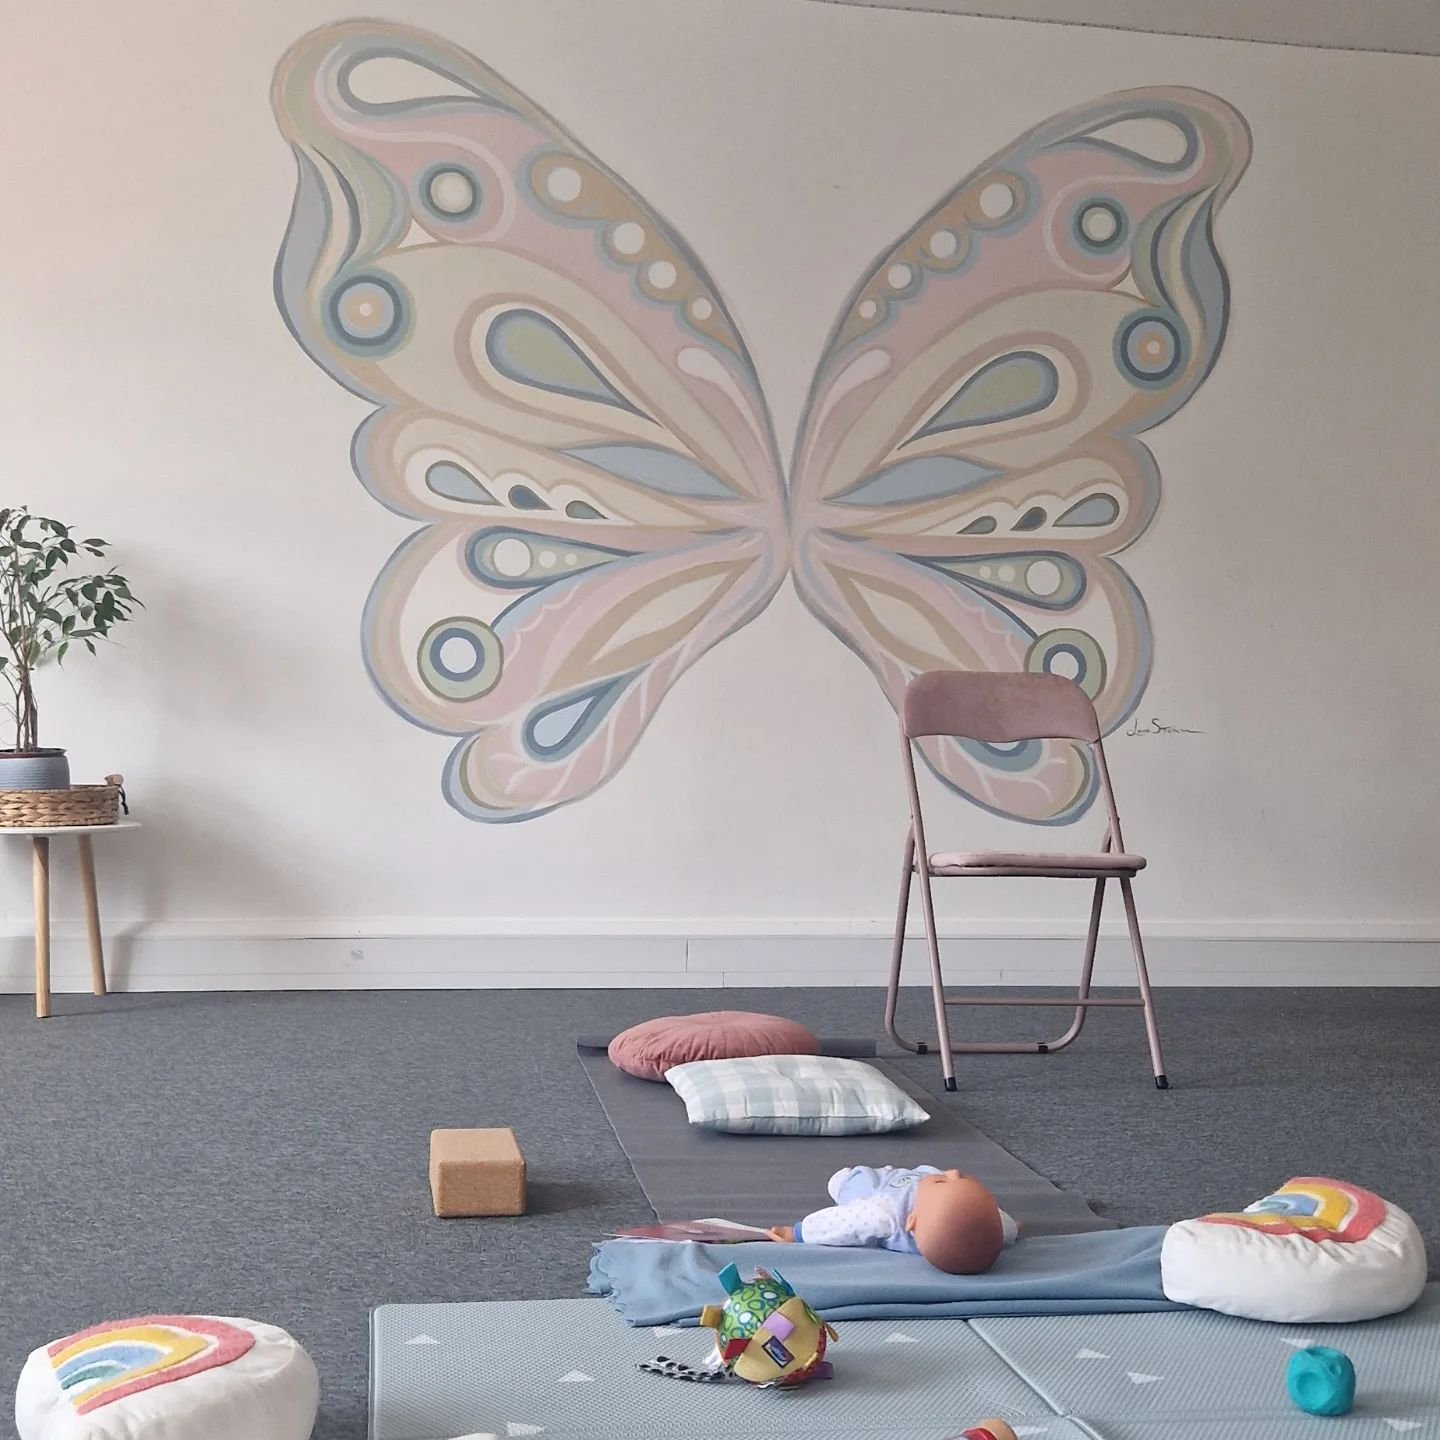 Mum &amp; Baby Yoga classes @little_roo_village.

Join me Monday afternoons for tea, chats, breathwork, movement and rest (if babies allow it!)

2pm - 3pm every Monday (no class Bank Holiday Mondays)

#mumandbabyyoga #postpartum #postpartumfitness #b